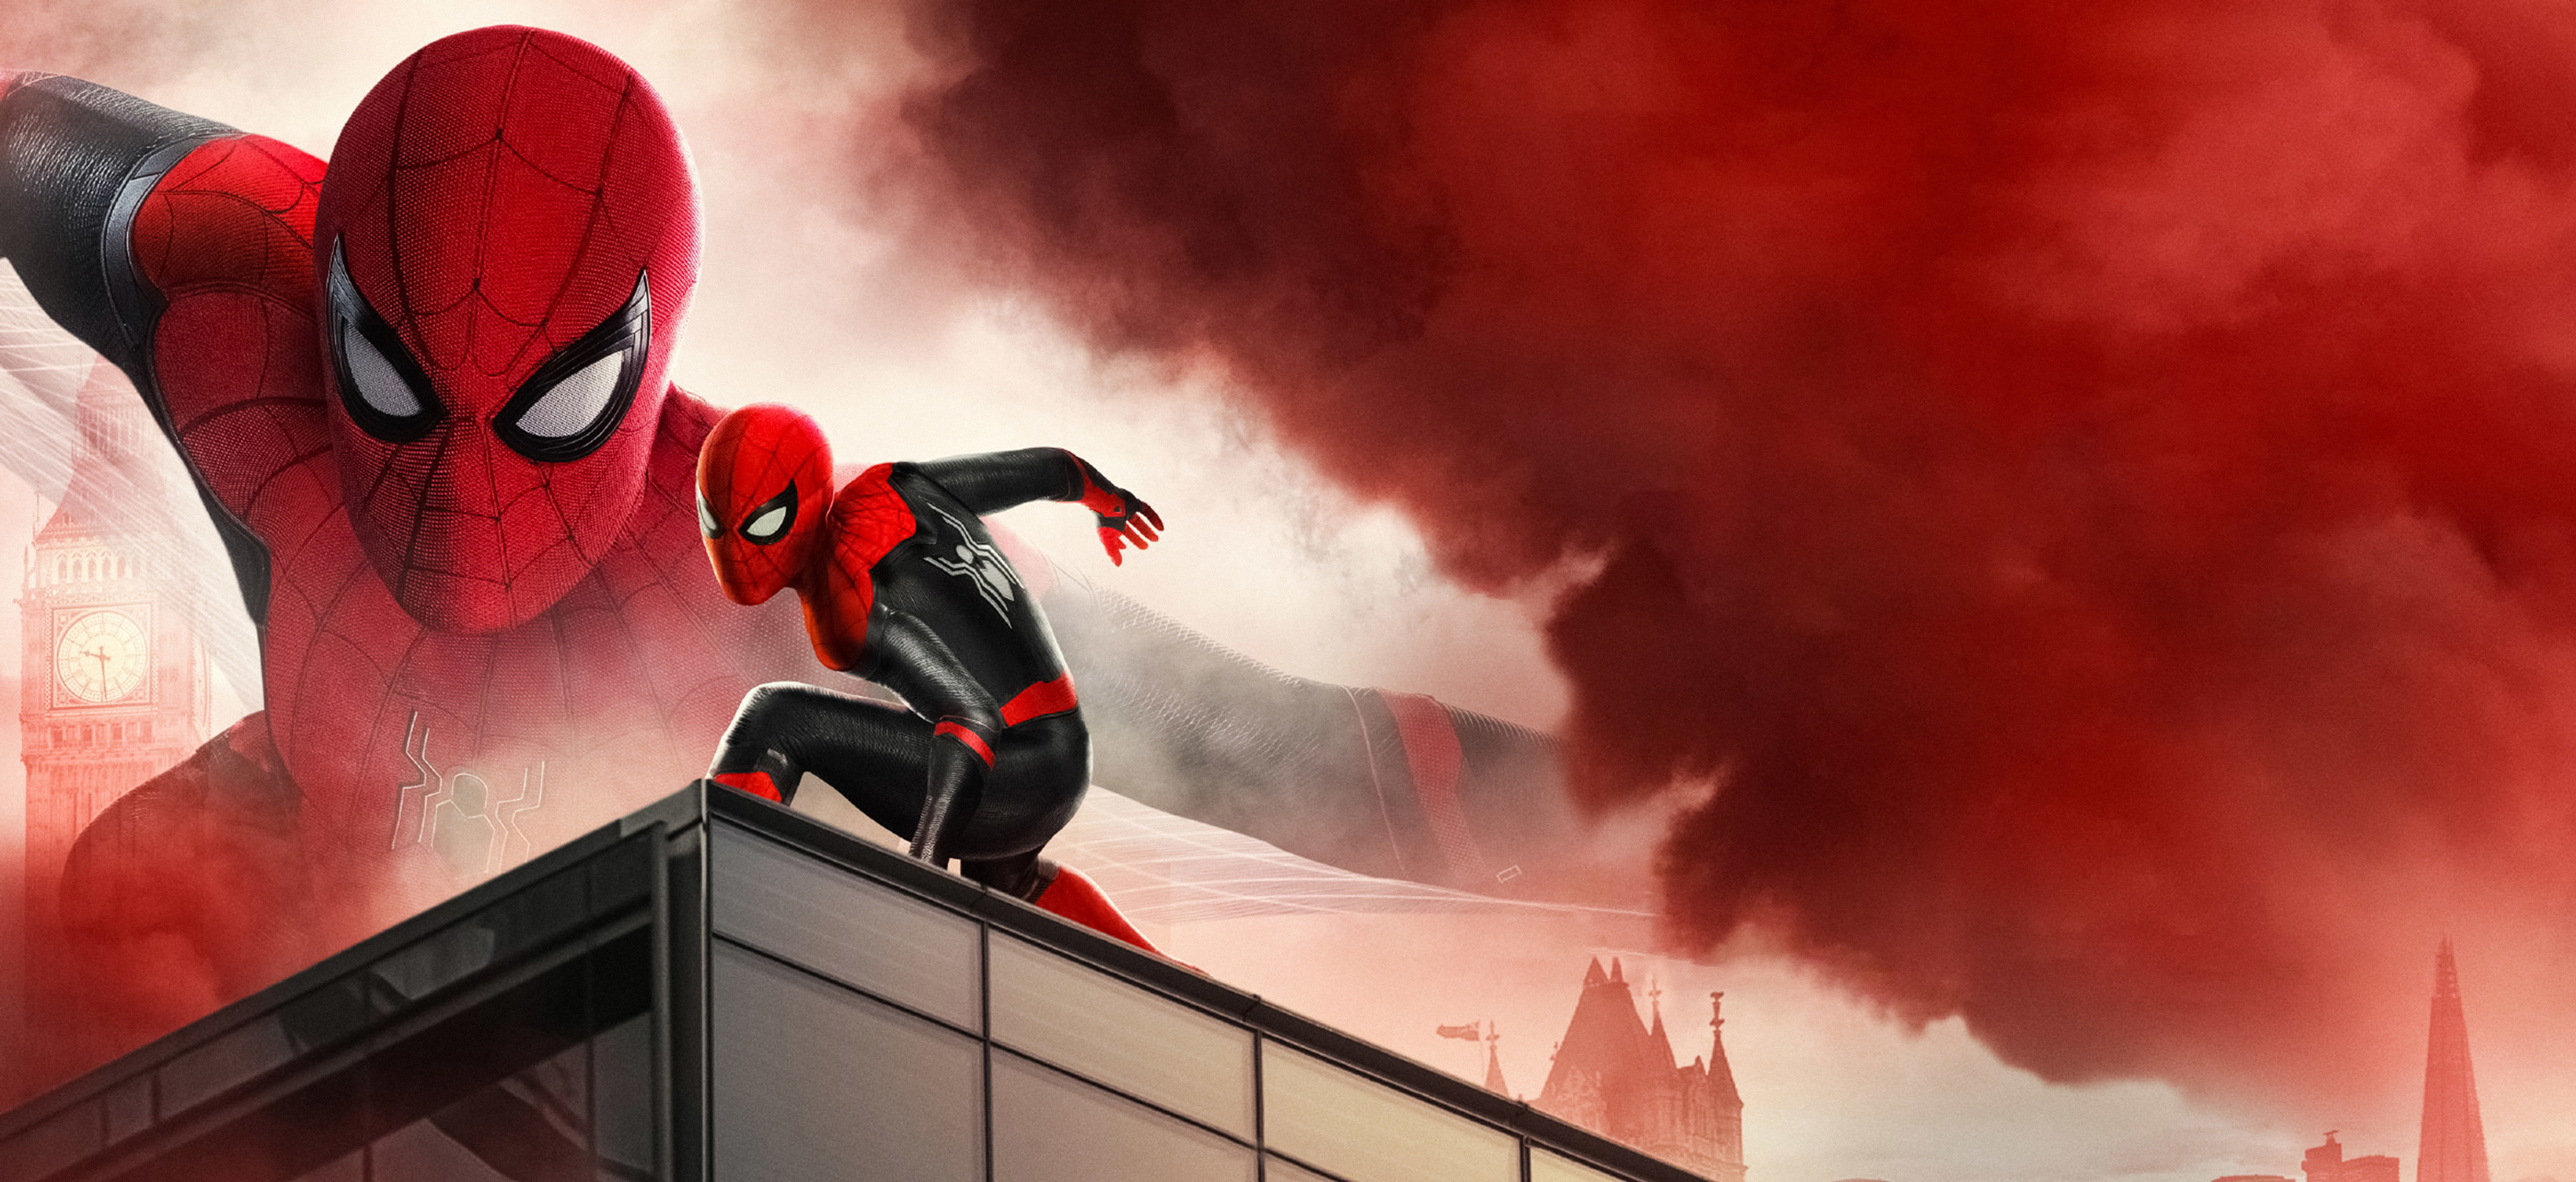 download the new Spider-Man: Far From Home